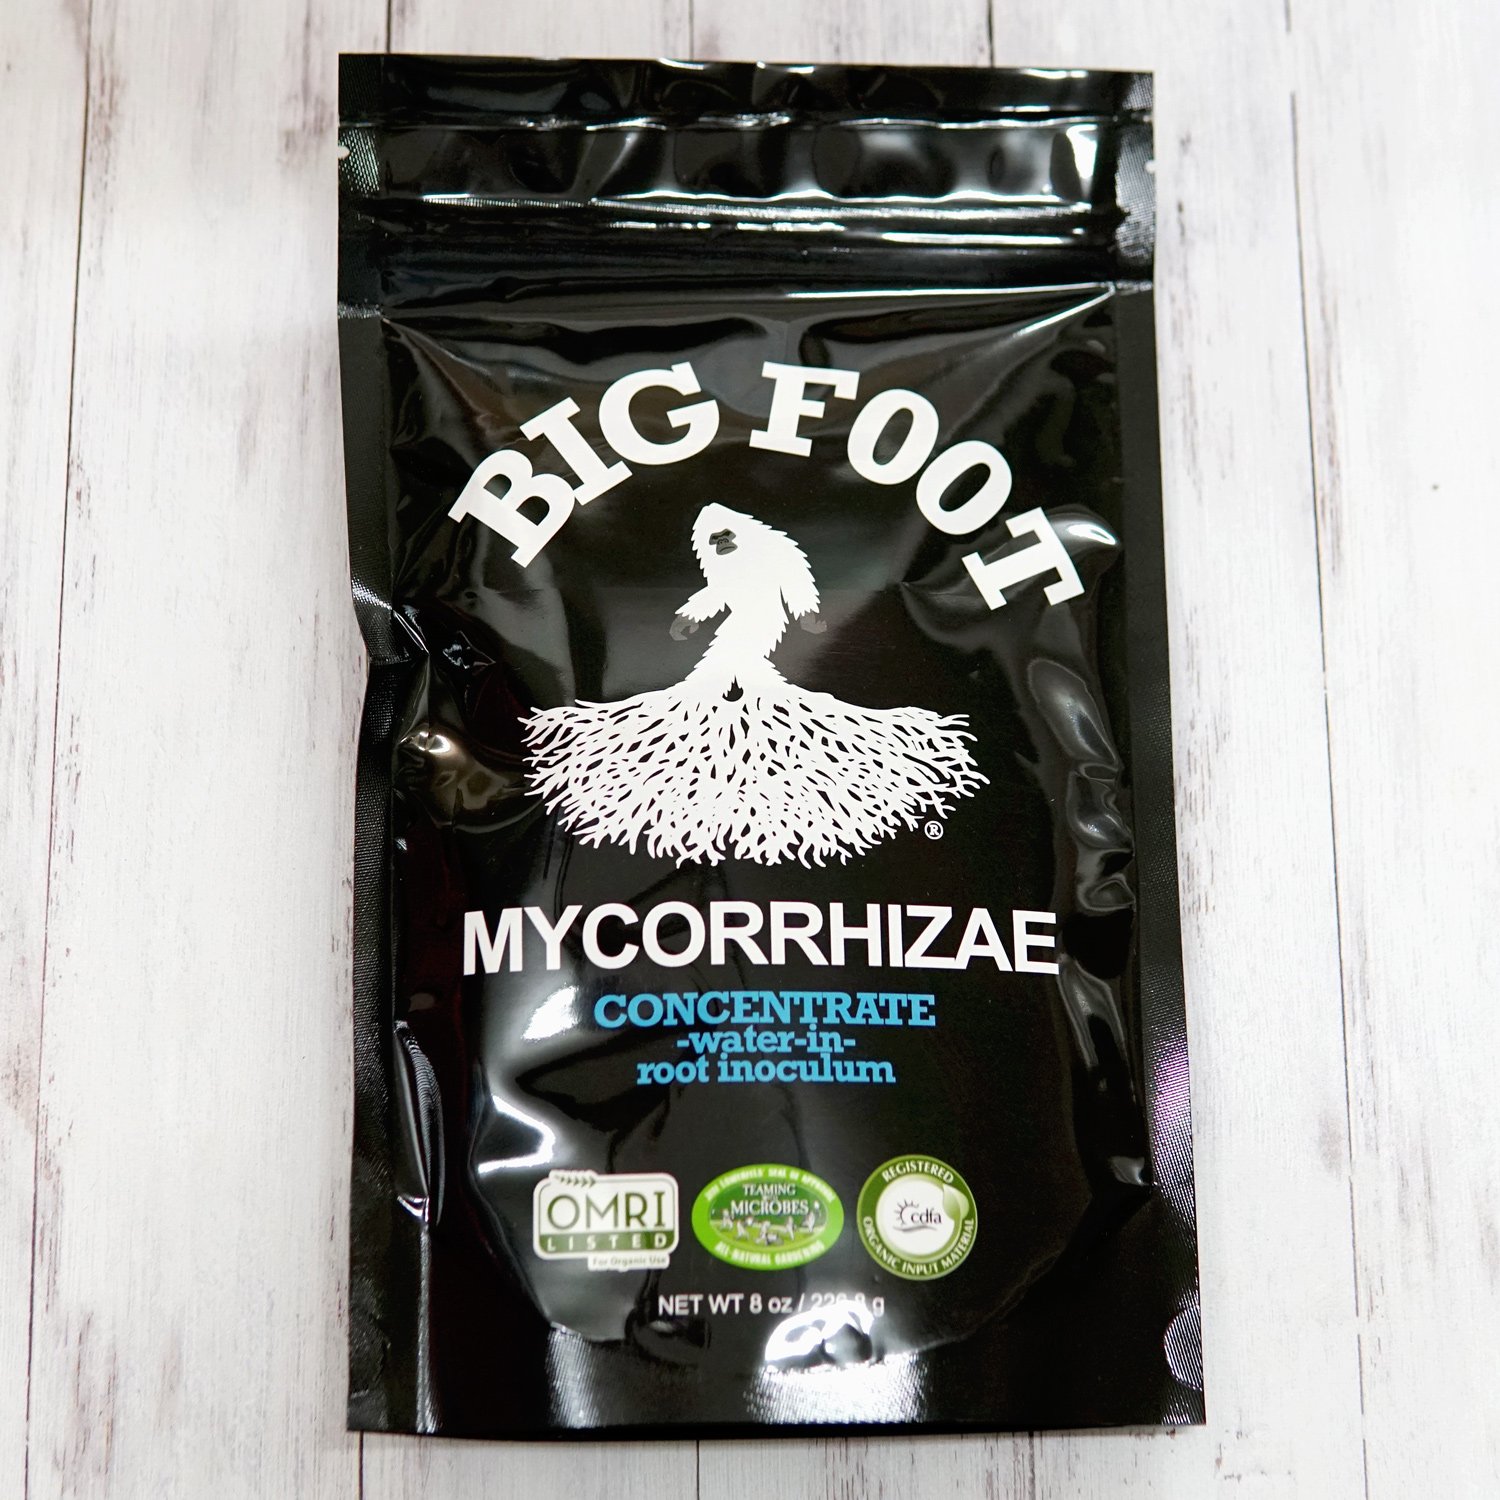 Big Foot Concentrate Mycorrhizae